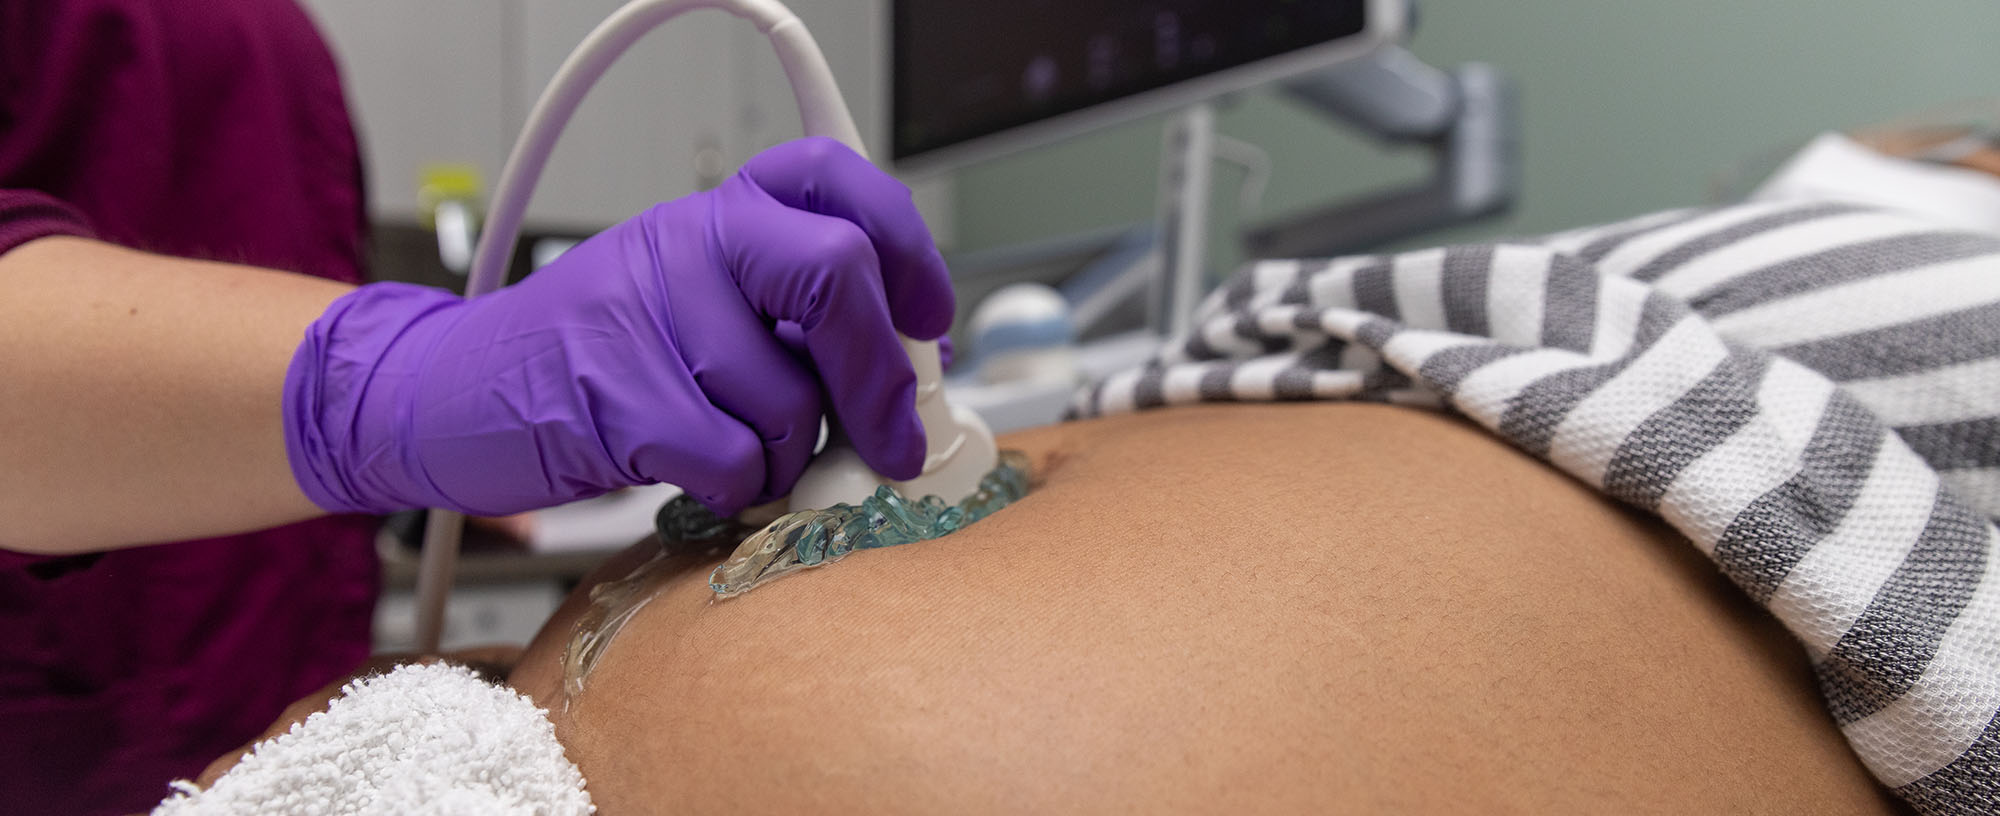 A pregnant person getting an ultrasound